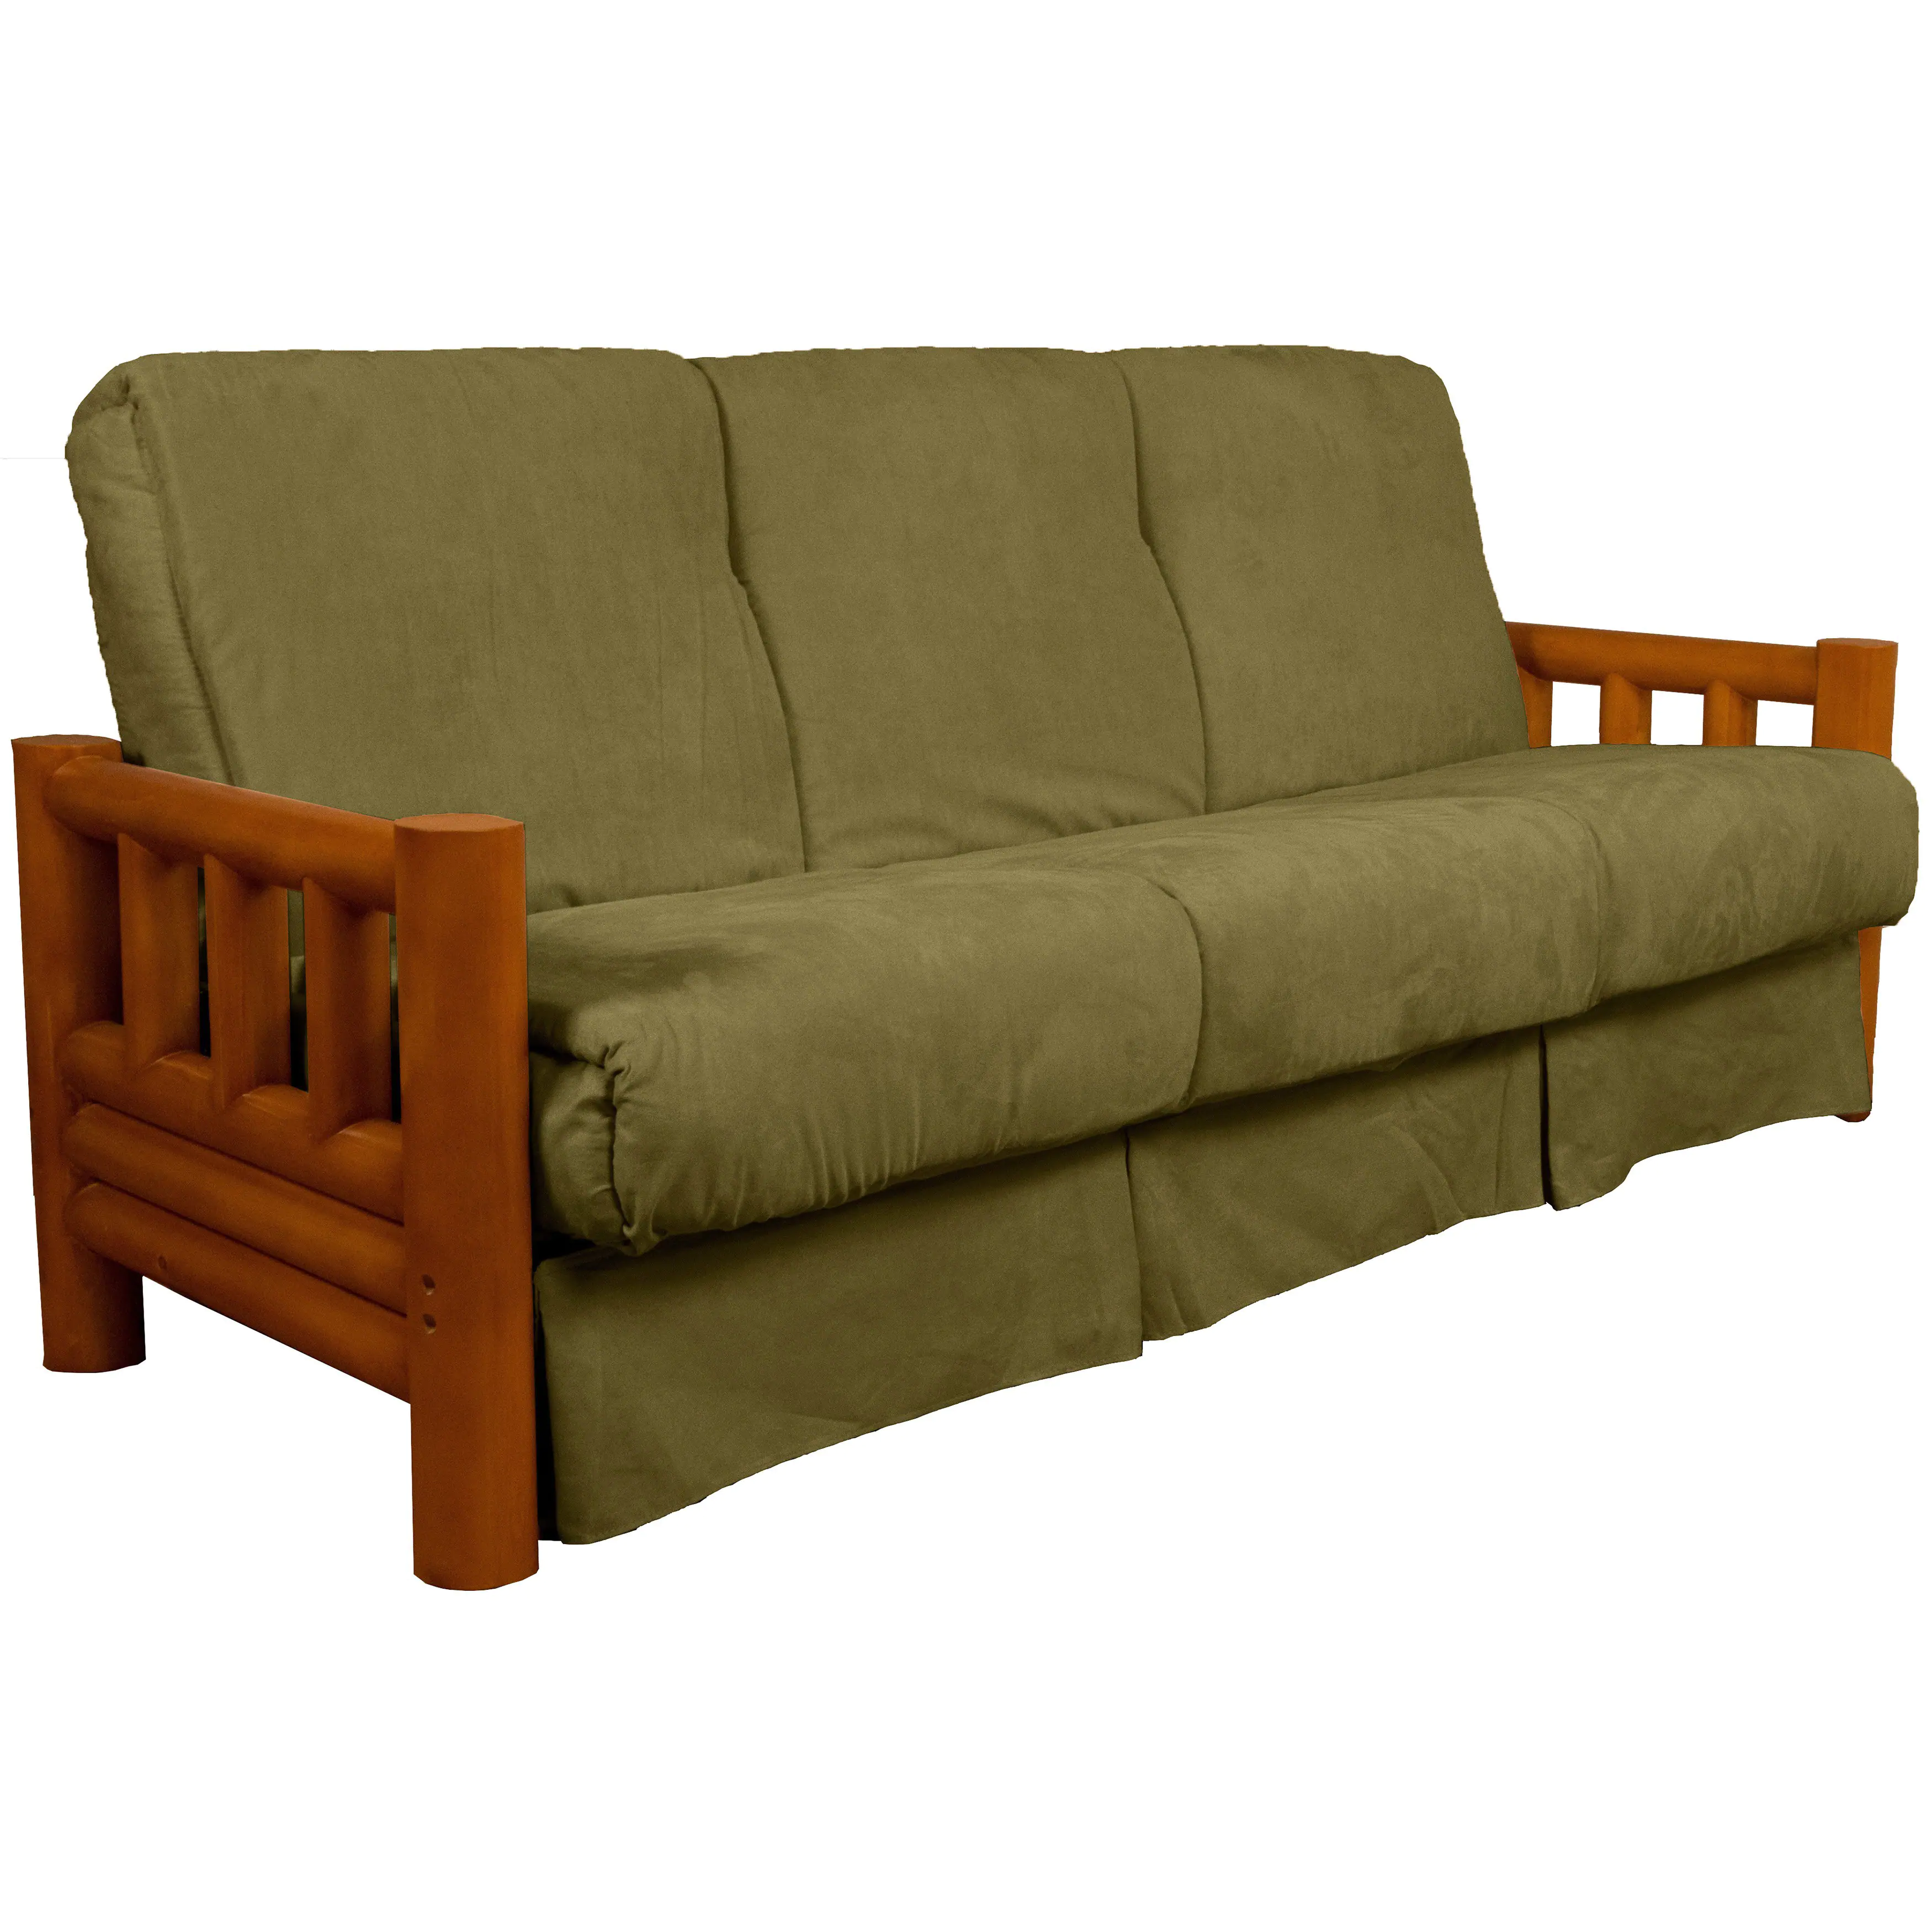 Pine Canopy Tuskegee Lodge-style Pillow Top Sofa Sleeper Bed